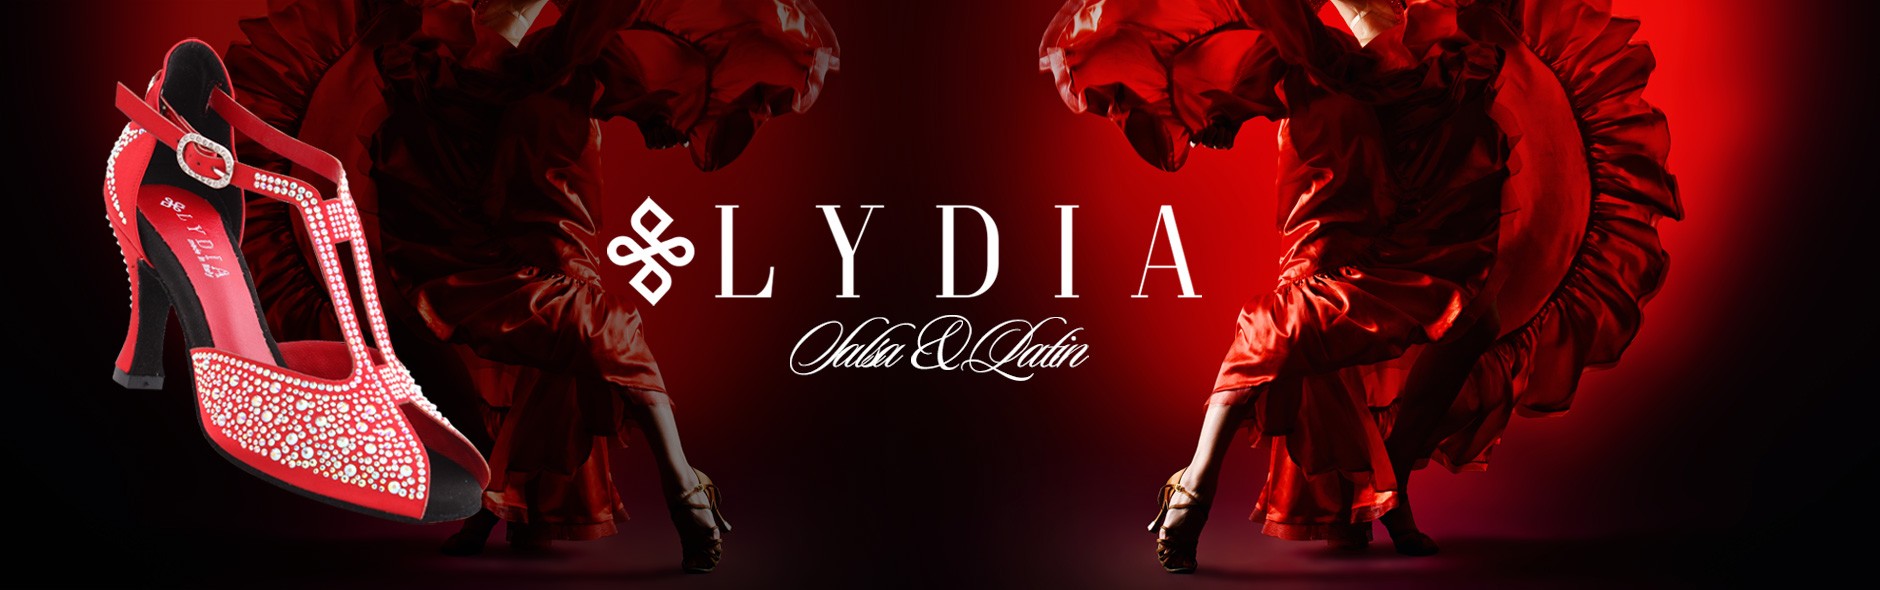 We present to you Lydia! Beauty without compromise!